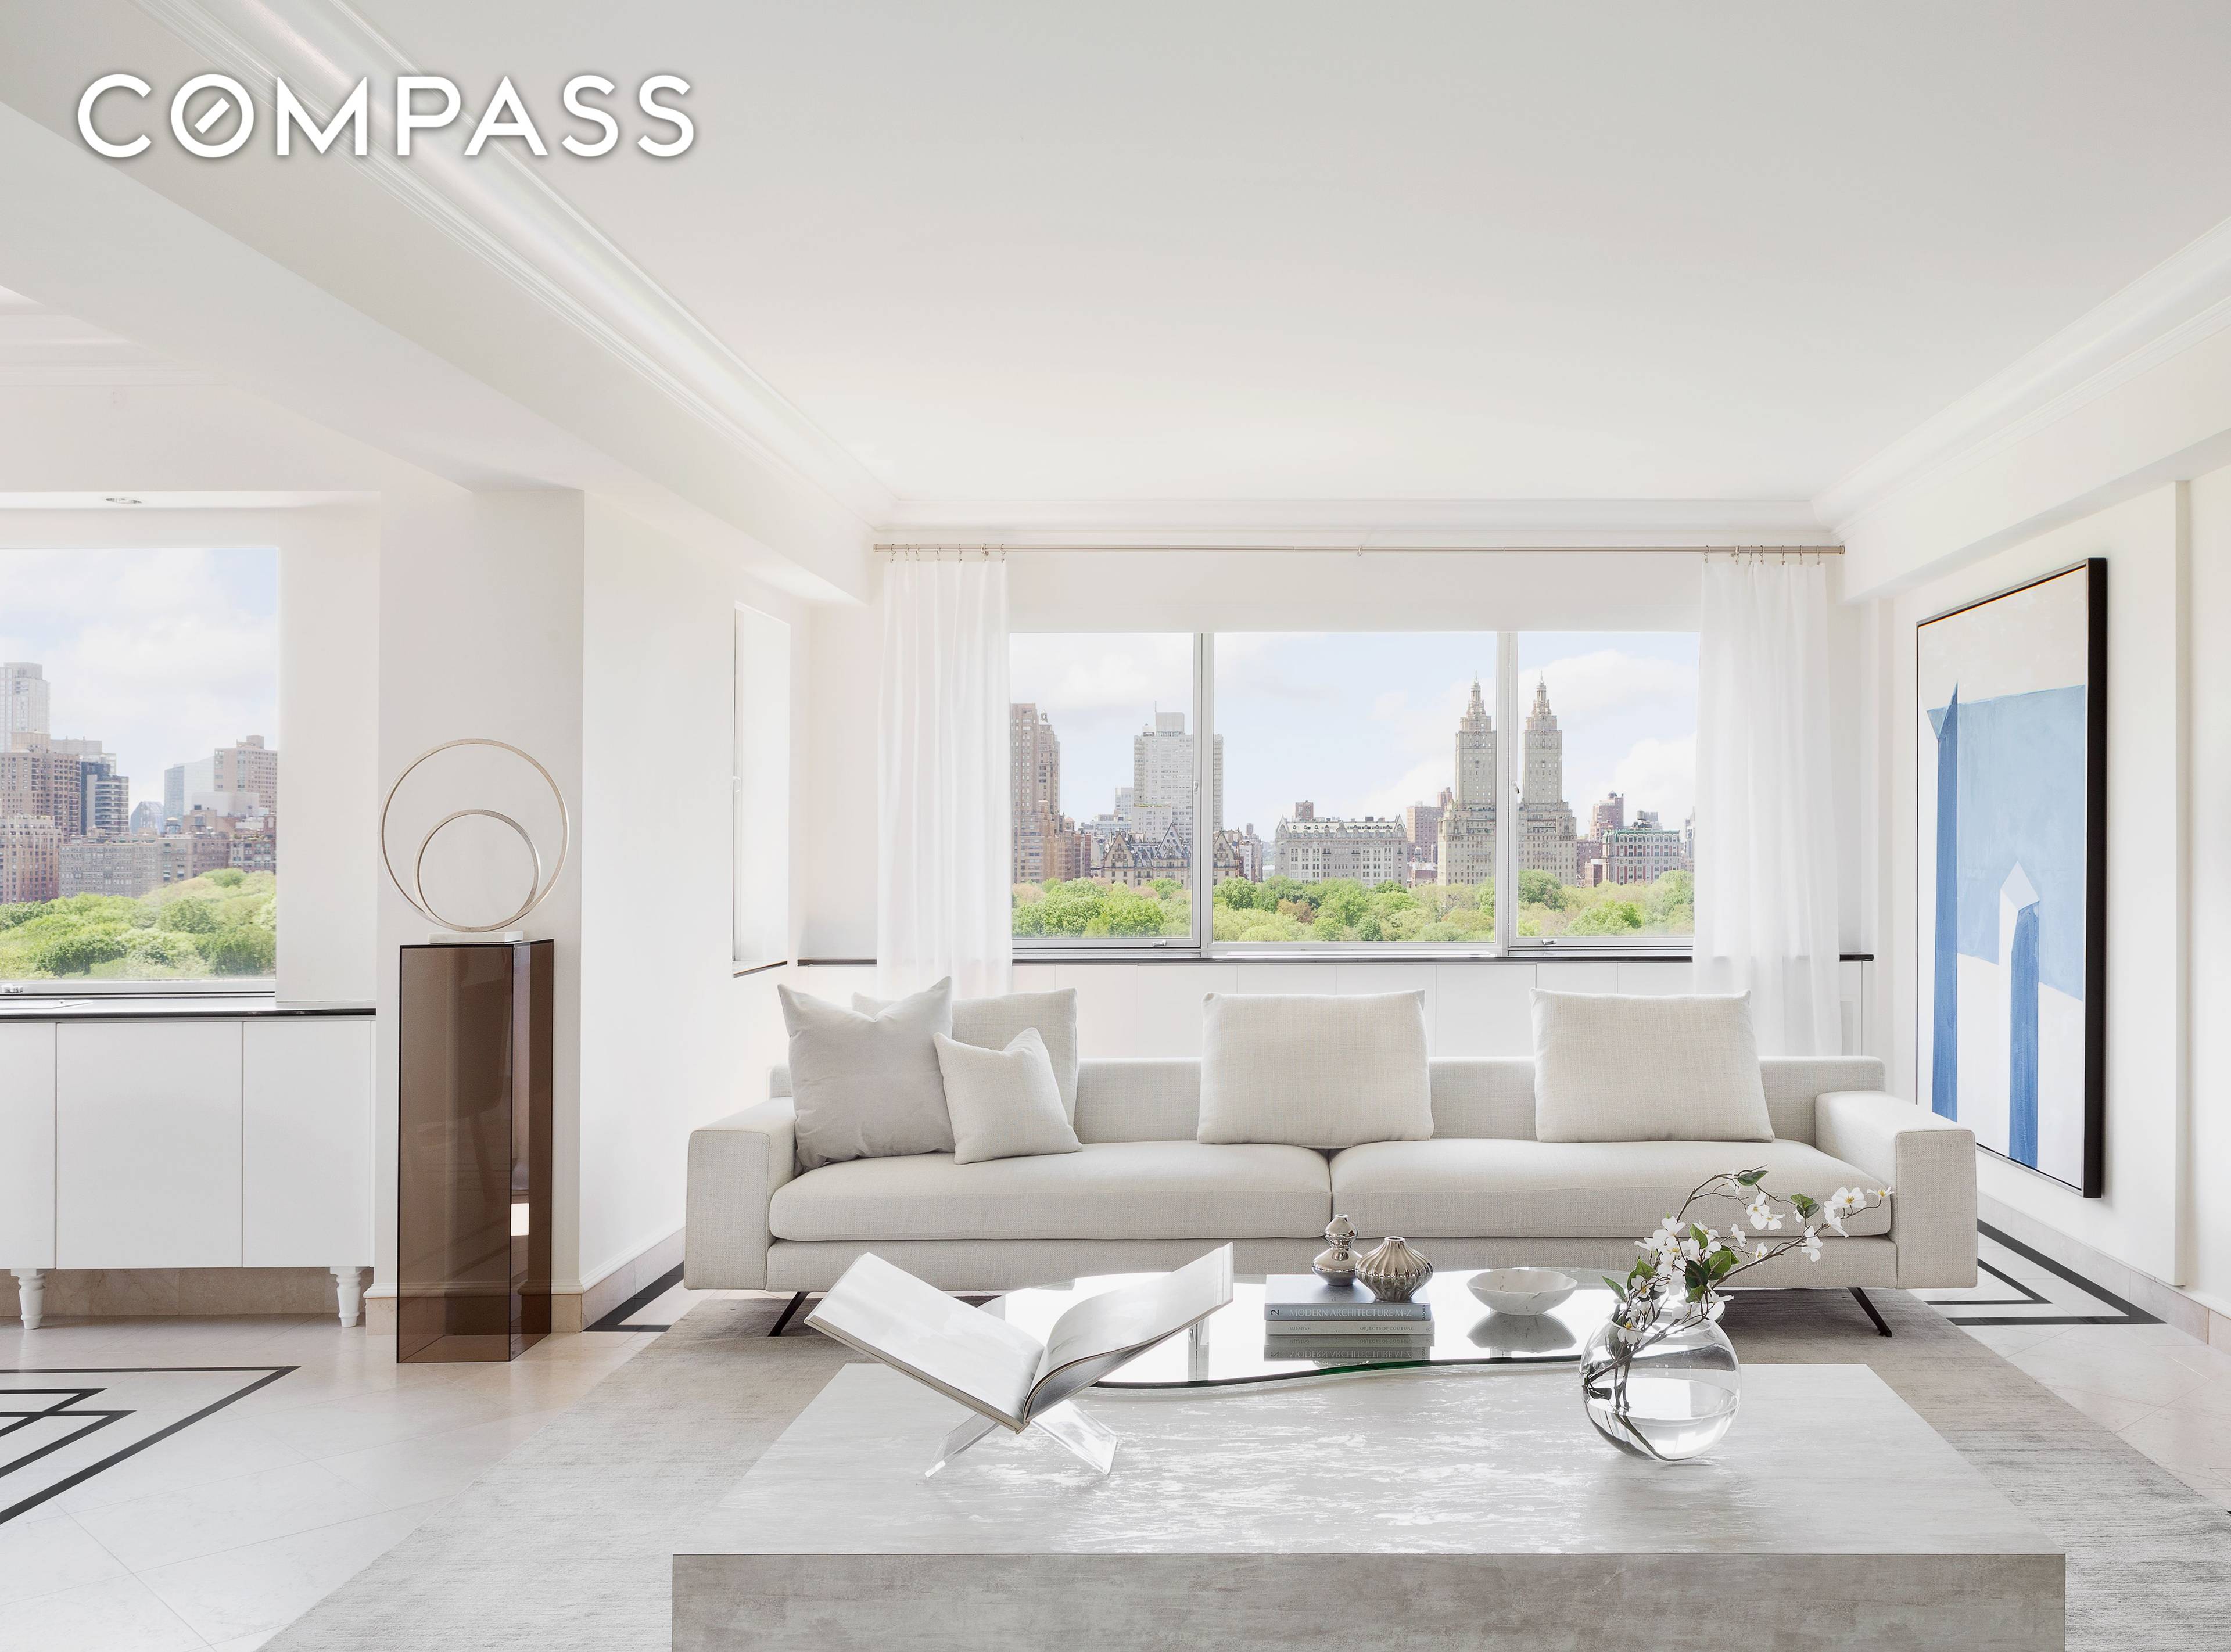 Just Listed ! Spectacular, Mint amp ; Sprawling high floor Fifth Avenue Condo with breathtaking views of Central Park amp ; the city.